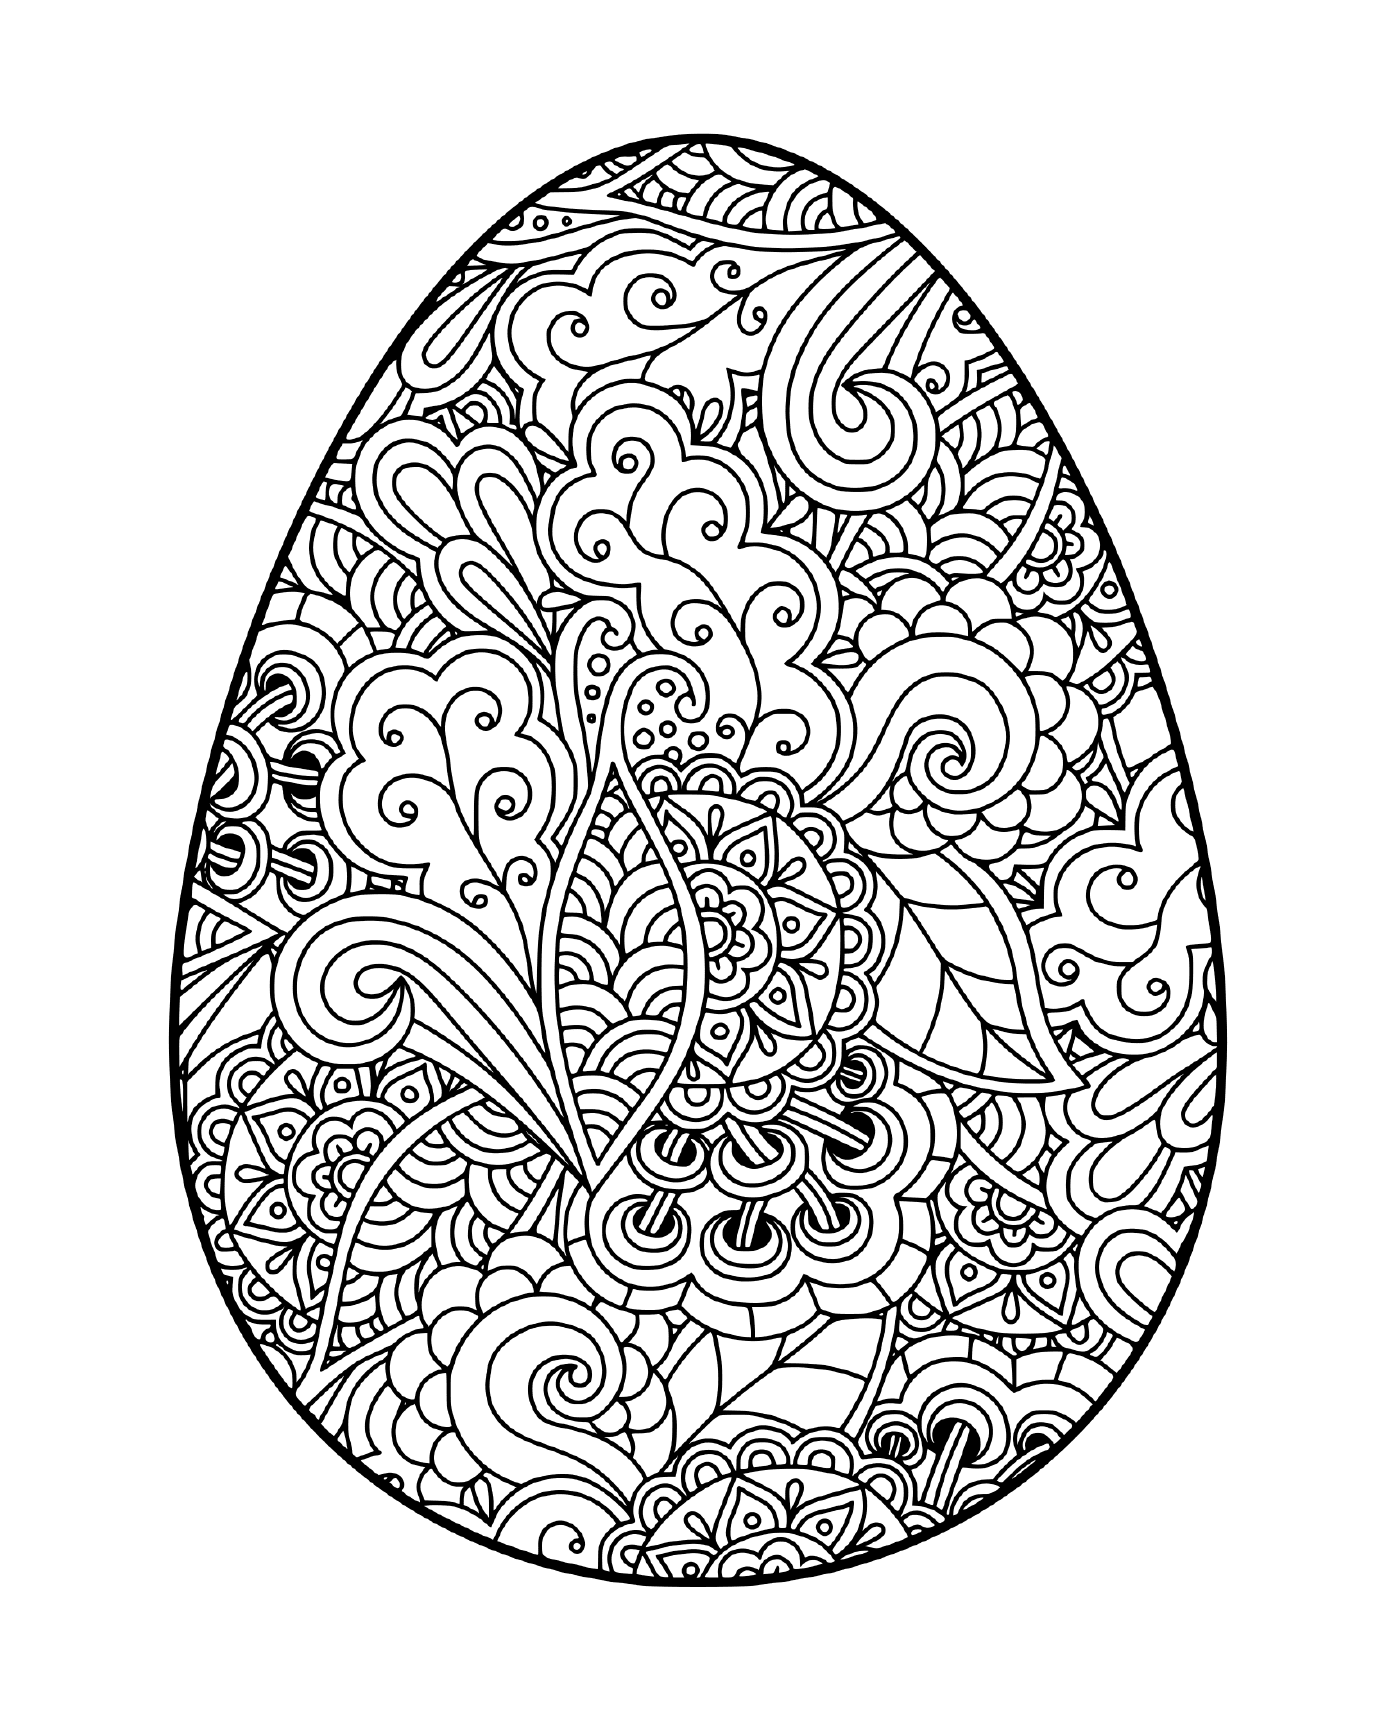  Easter egg for adults with floral pattern 